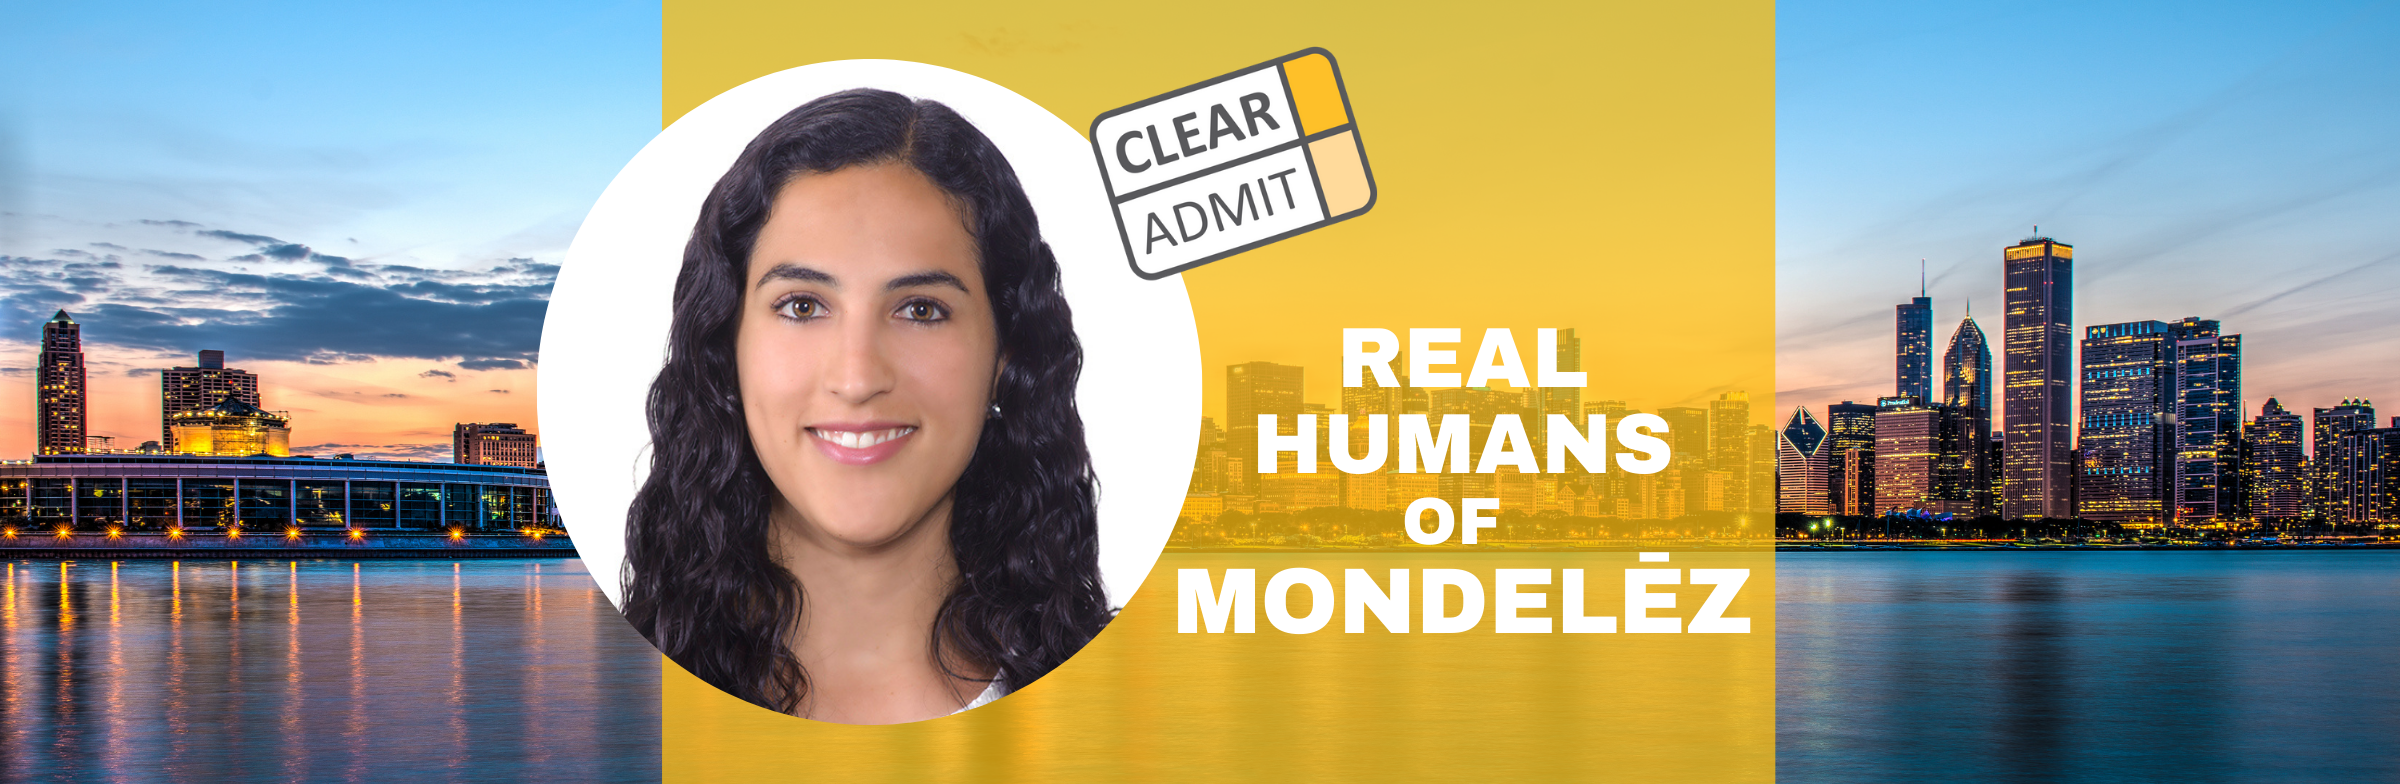 Image for Real Humans of Mondelēz International: Maria Pia Iriarte, MIT Sloan ’18, Sr. Manager Commercial Finance, Alternative Channels